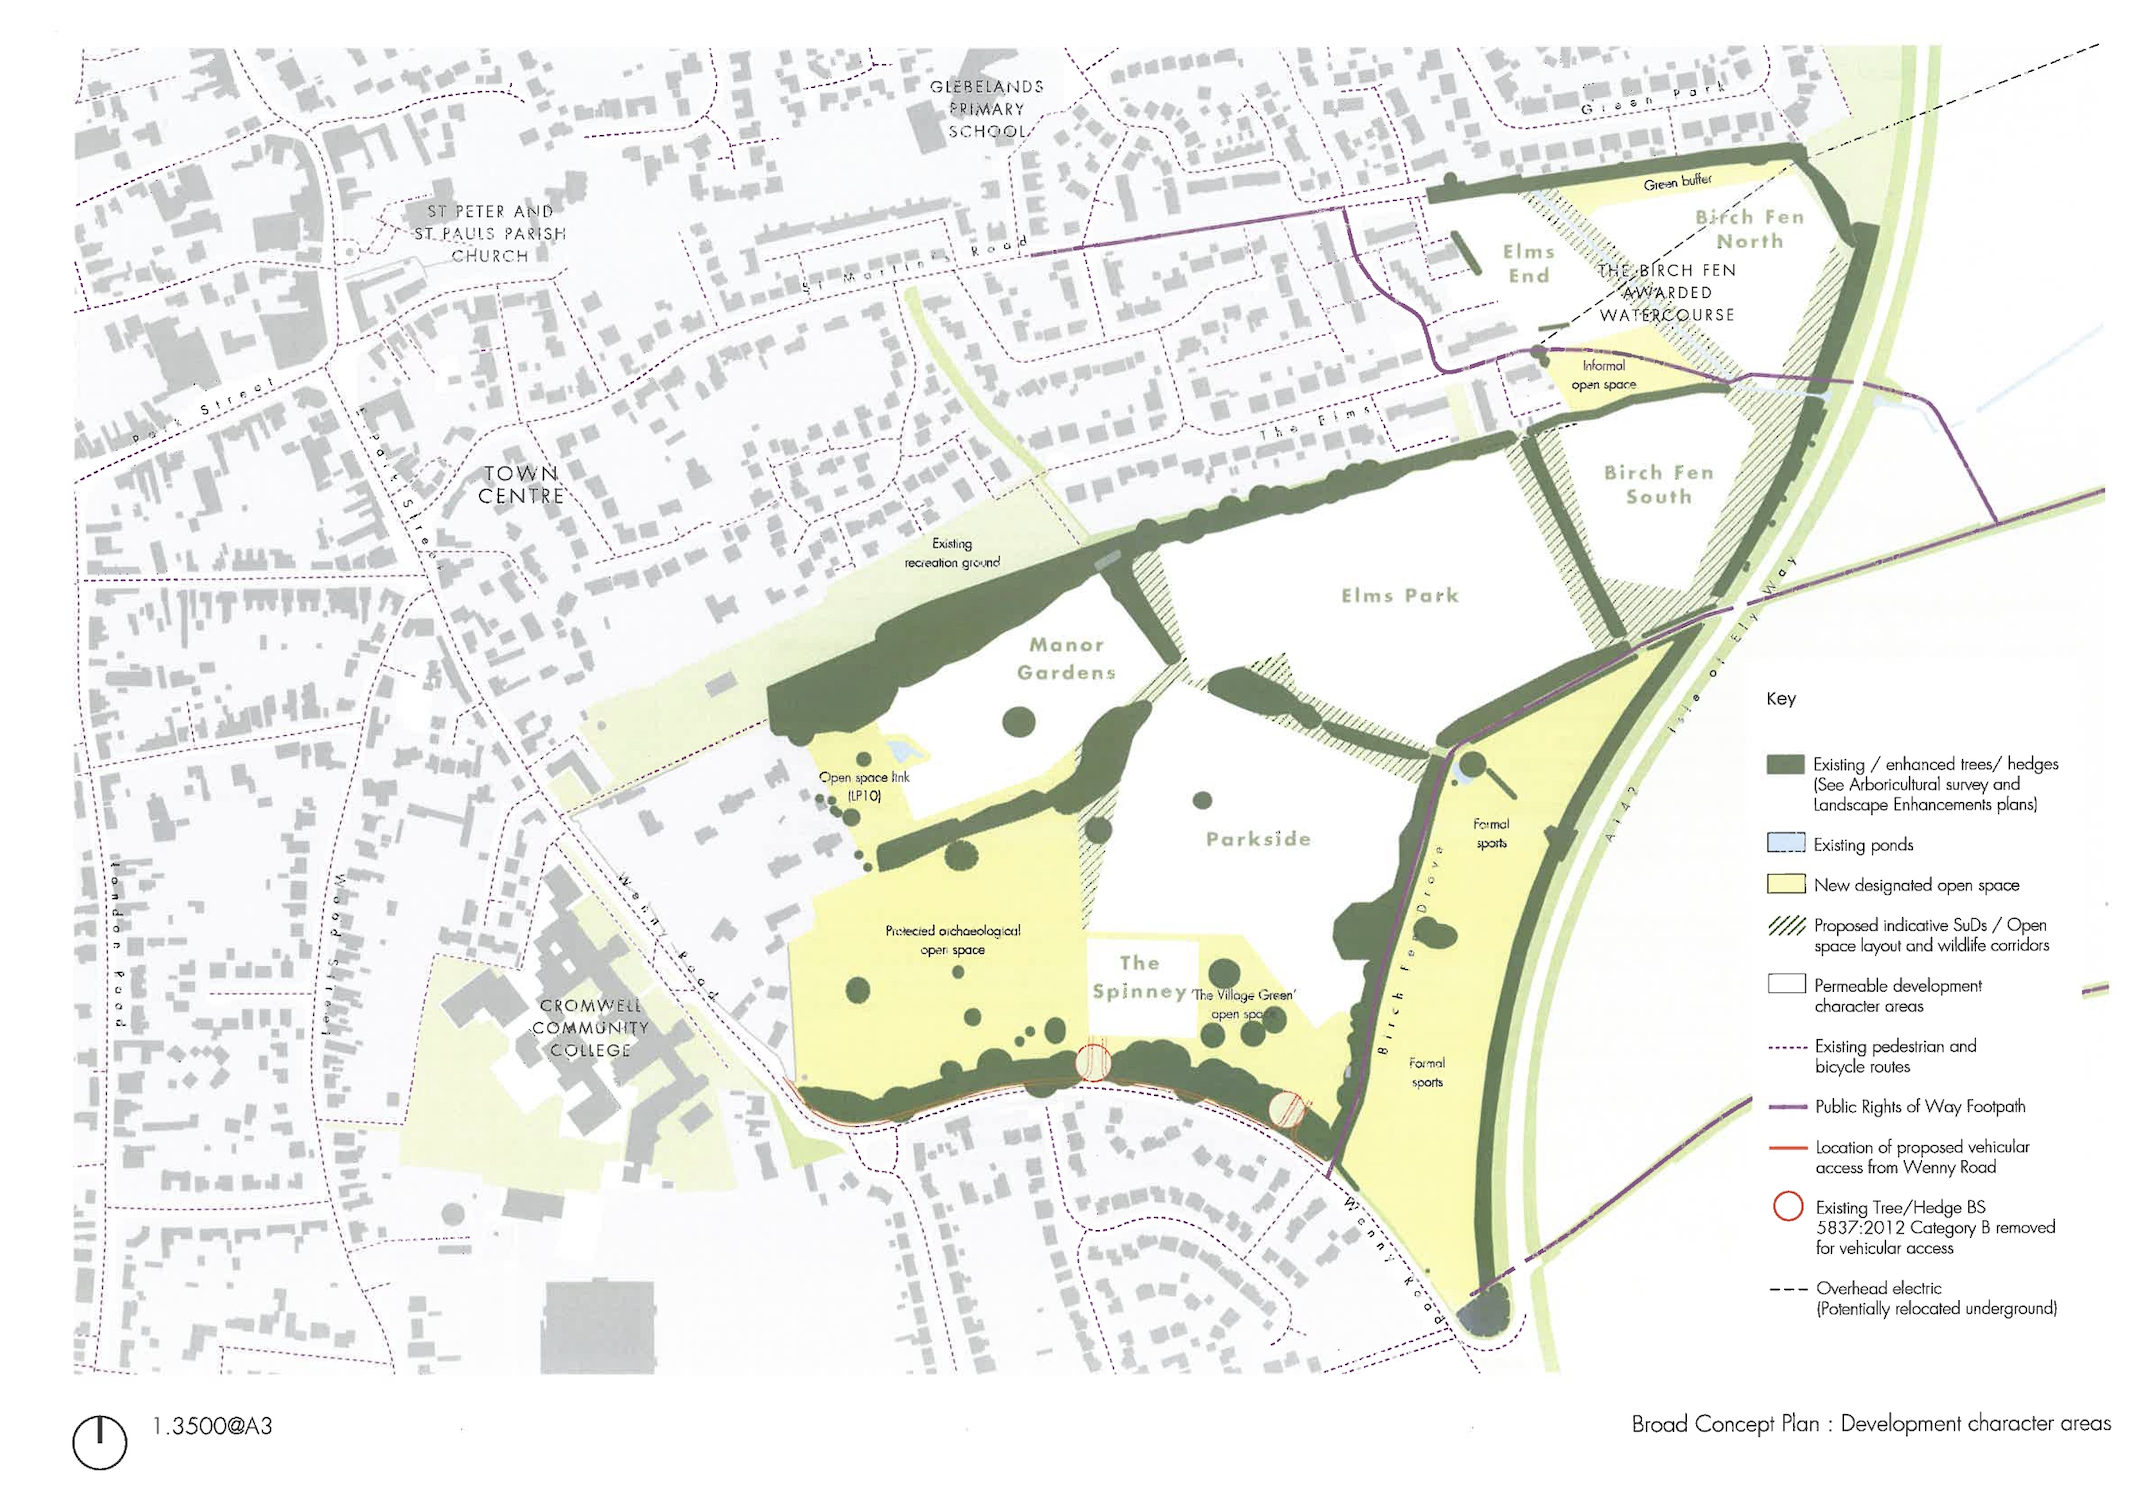 A diagram showing the different development names for character areas within the East Chatteris Broad Concept Plan site